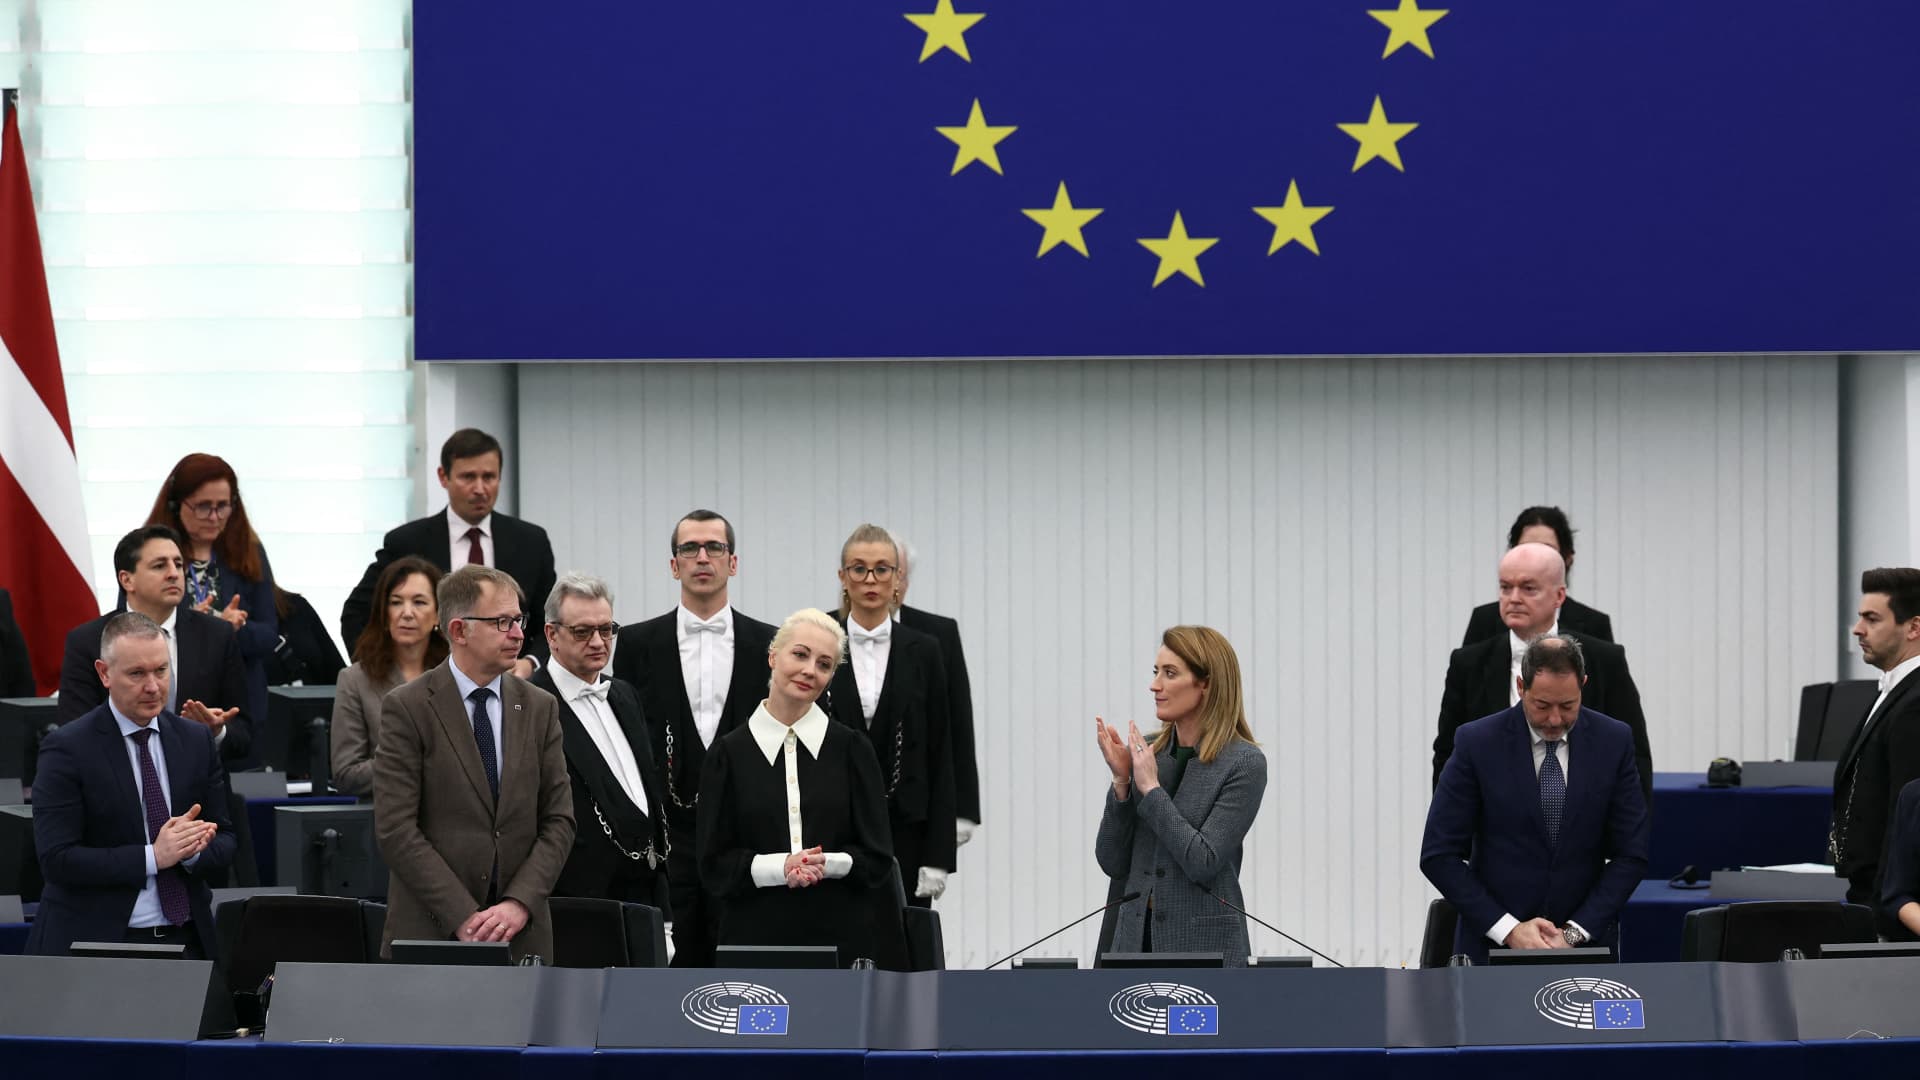 Yulia Navalnaya (first row, 3rdL), widow of Kremlin opposition leader Alexei Navalny, who died on February 16 in a Russian prison, is applauded by European Parliament President Roberta Metsola (first row, 3rdR) after addressing the European Parliament in Strasbourg, eastern France, on February 28, 2024. 